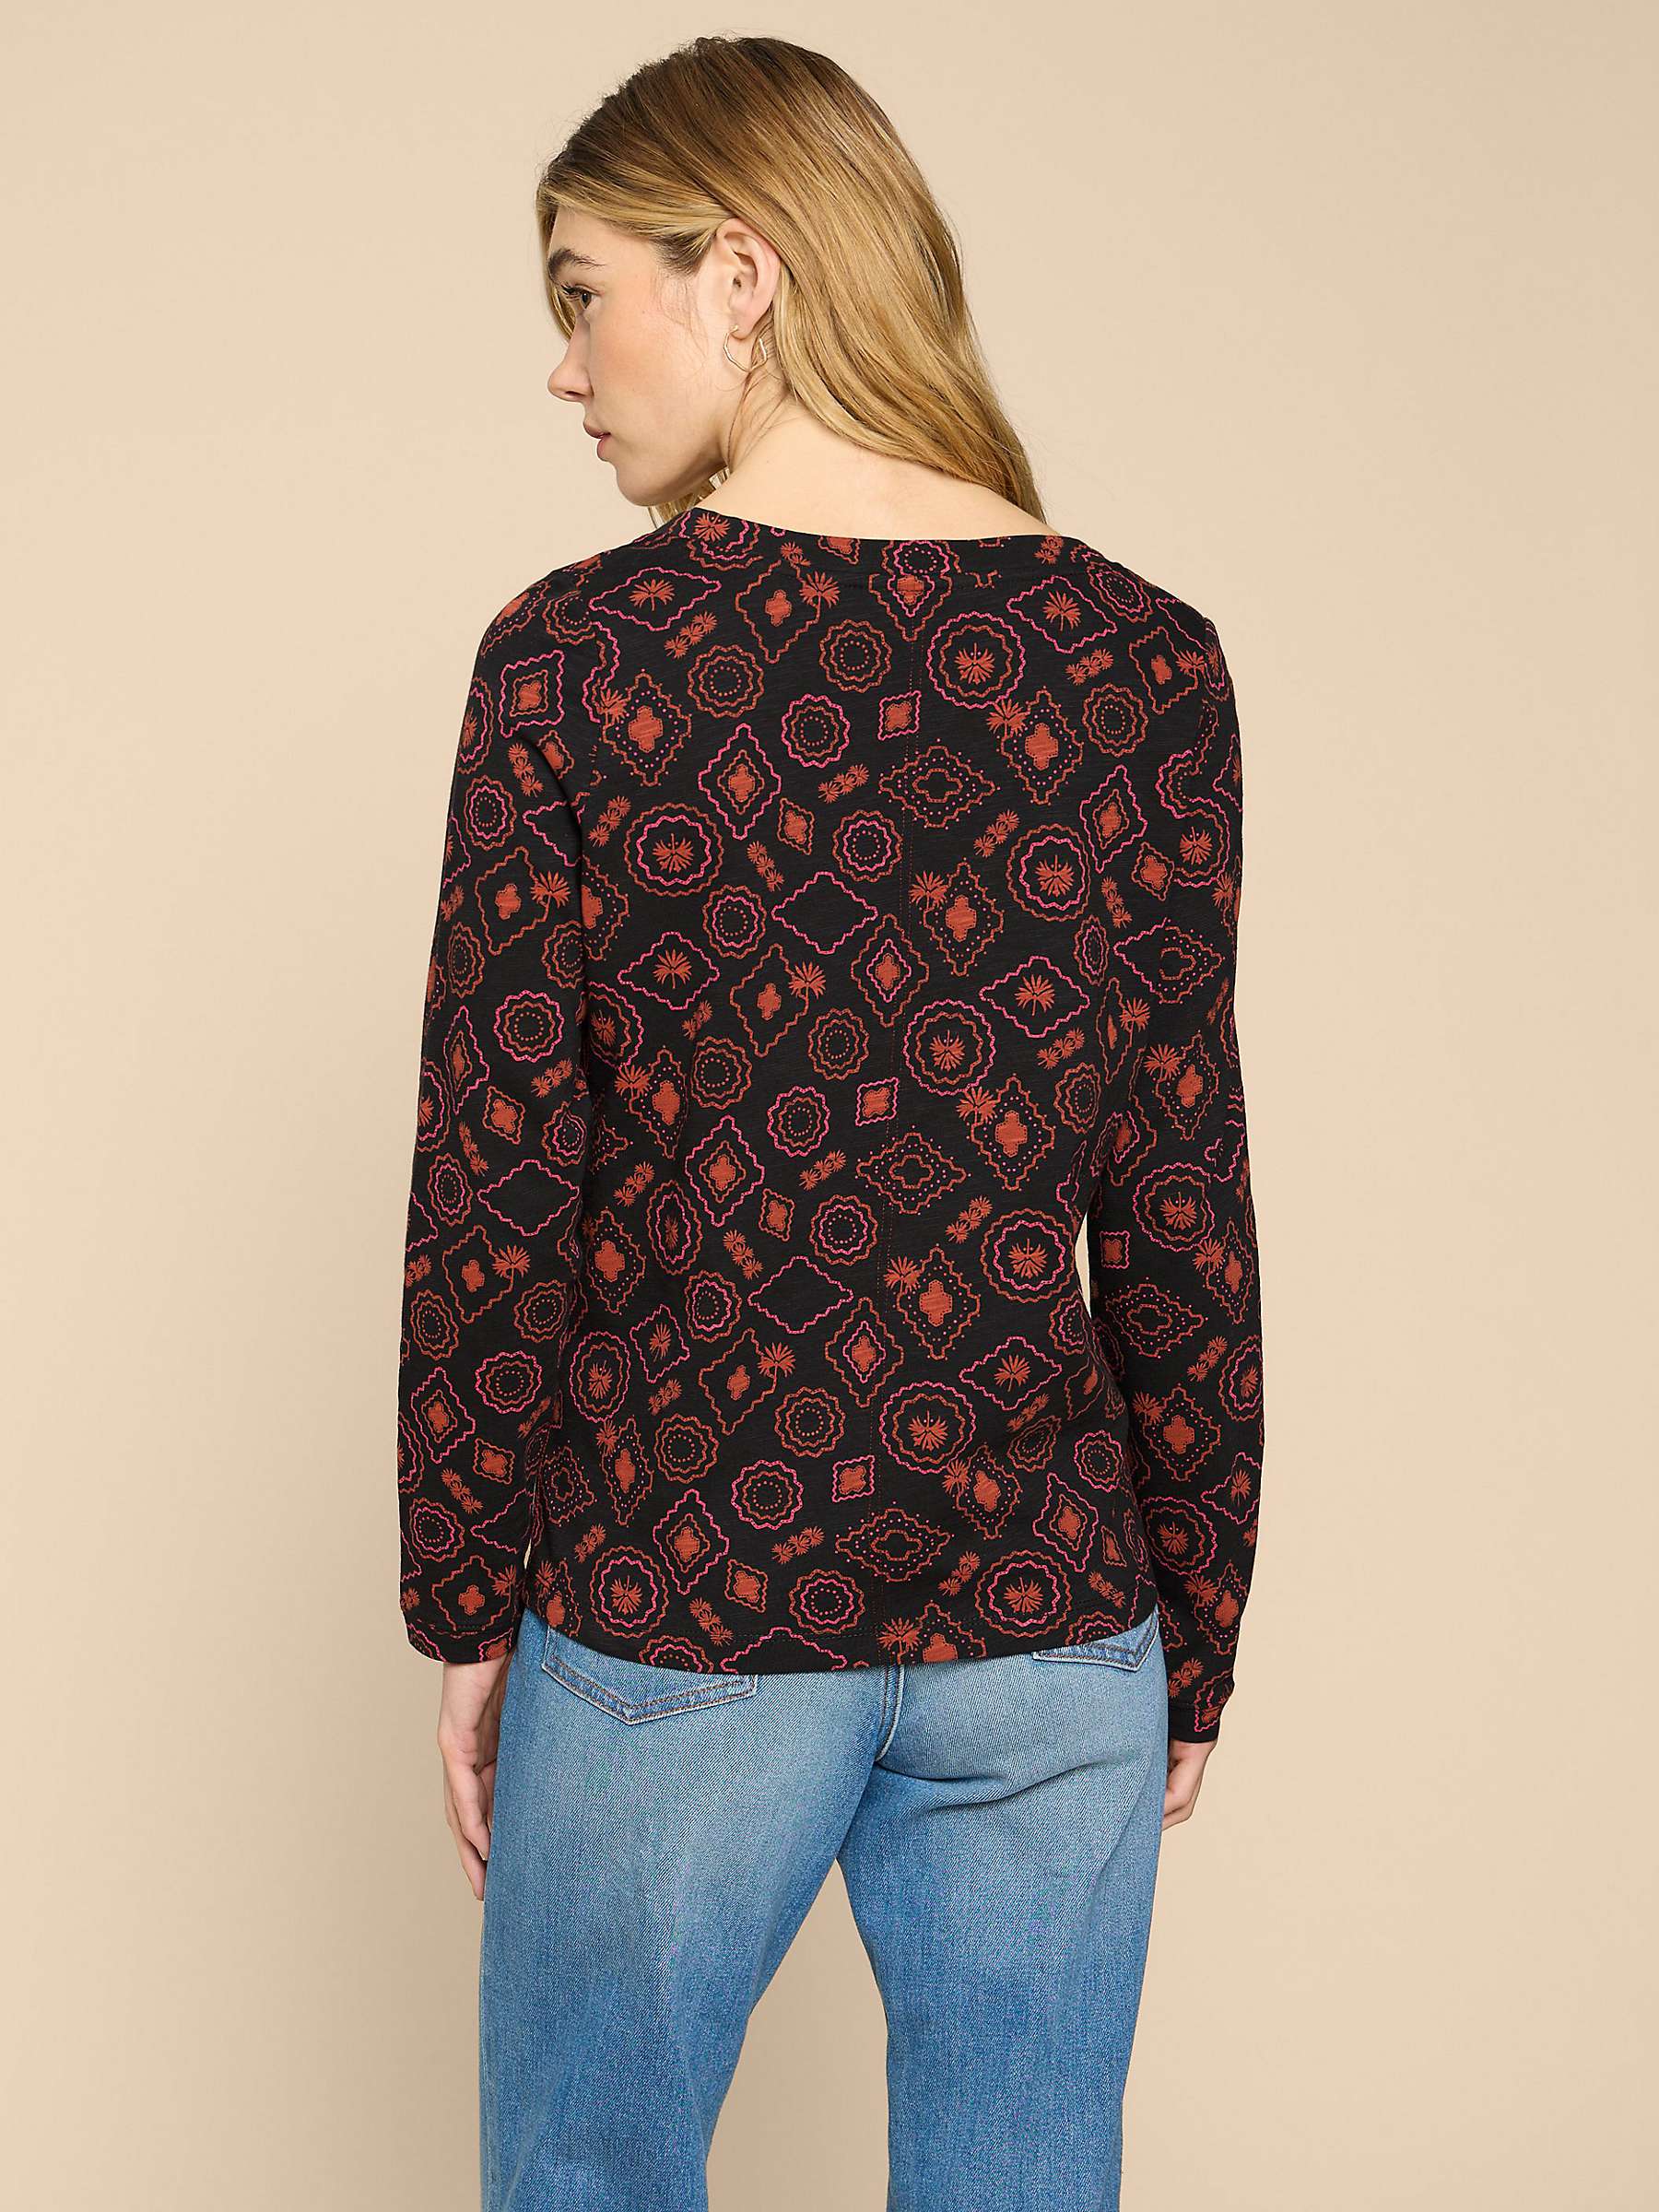 Buy White Stuff Nelly Graphic Print Long Sleeve Cotton T-Shirt, Black/Multi Online at johnlewis.com